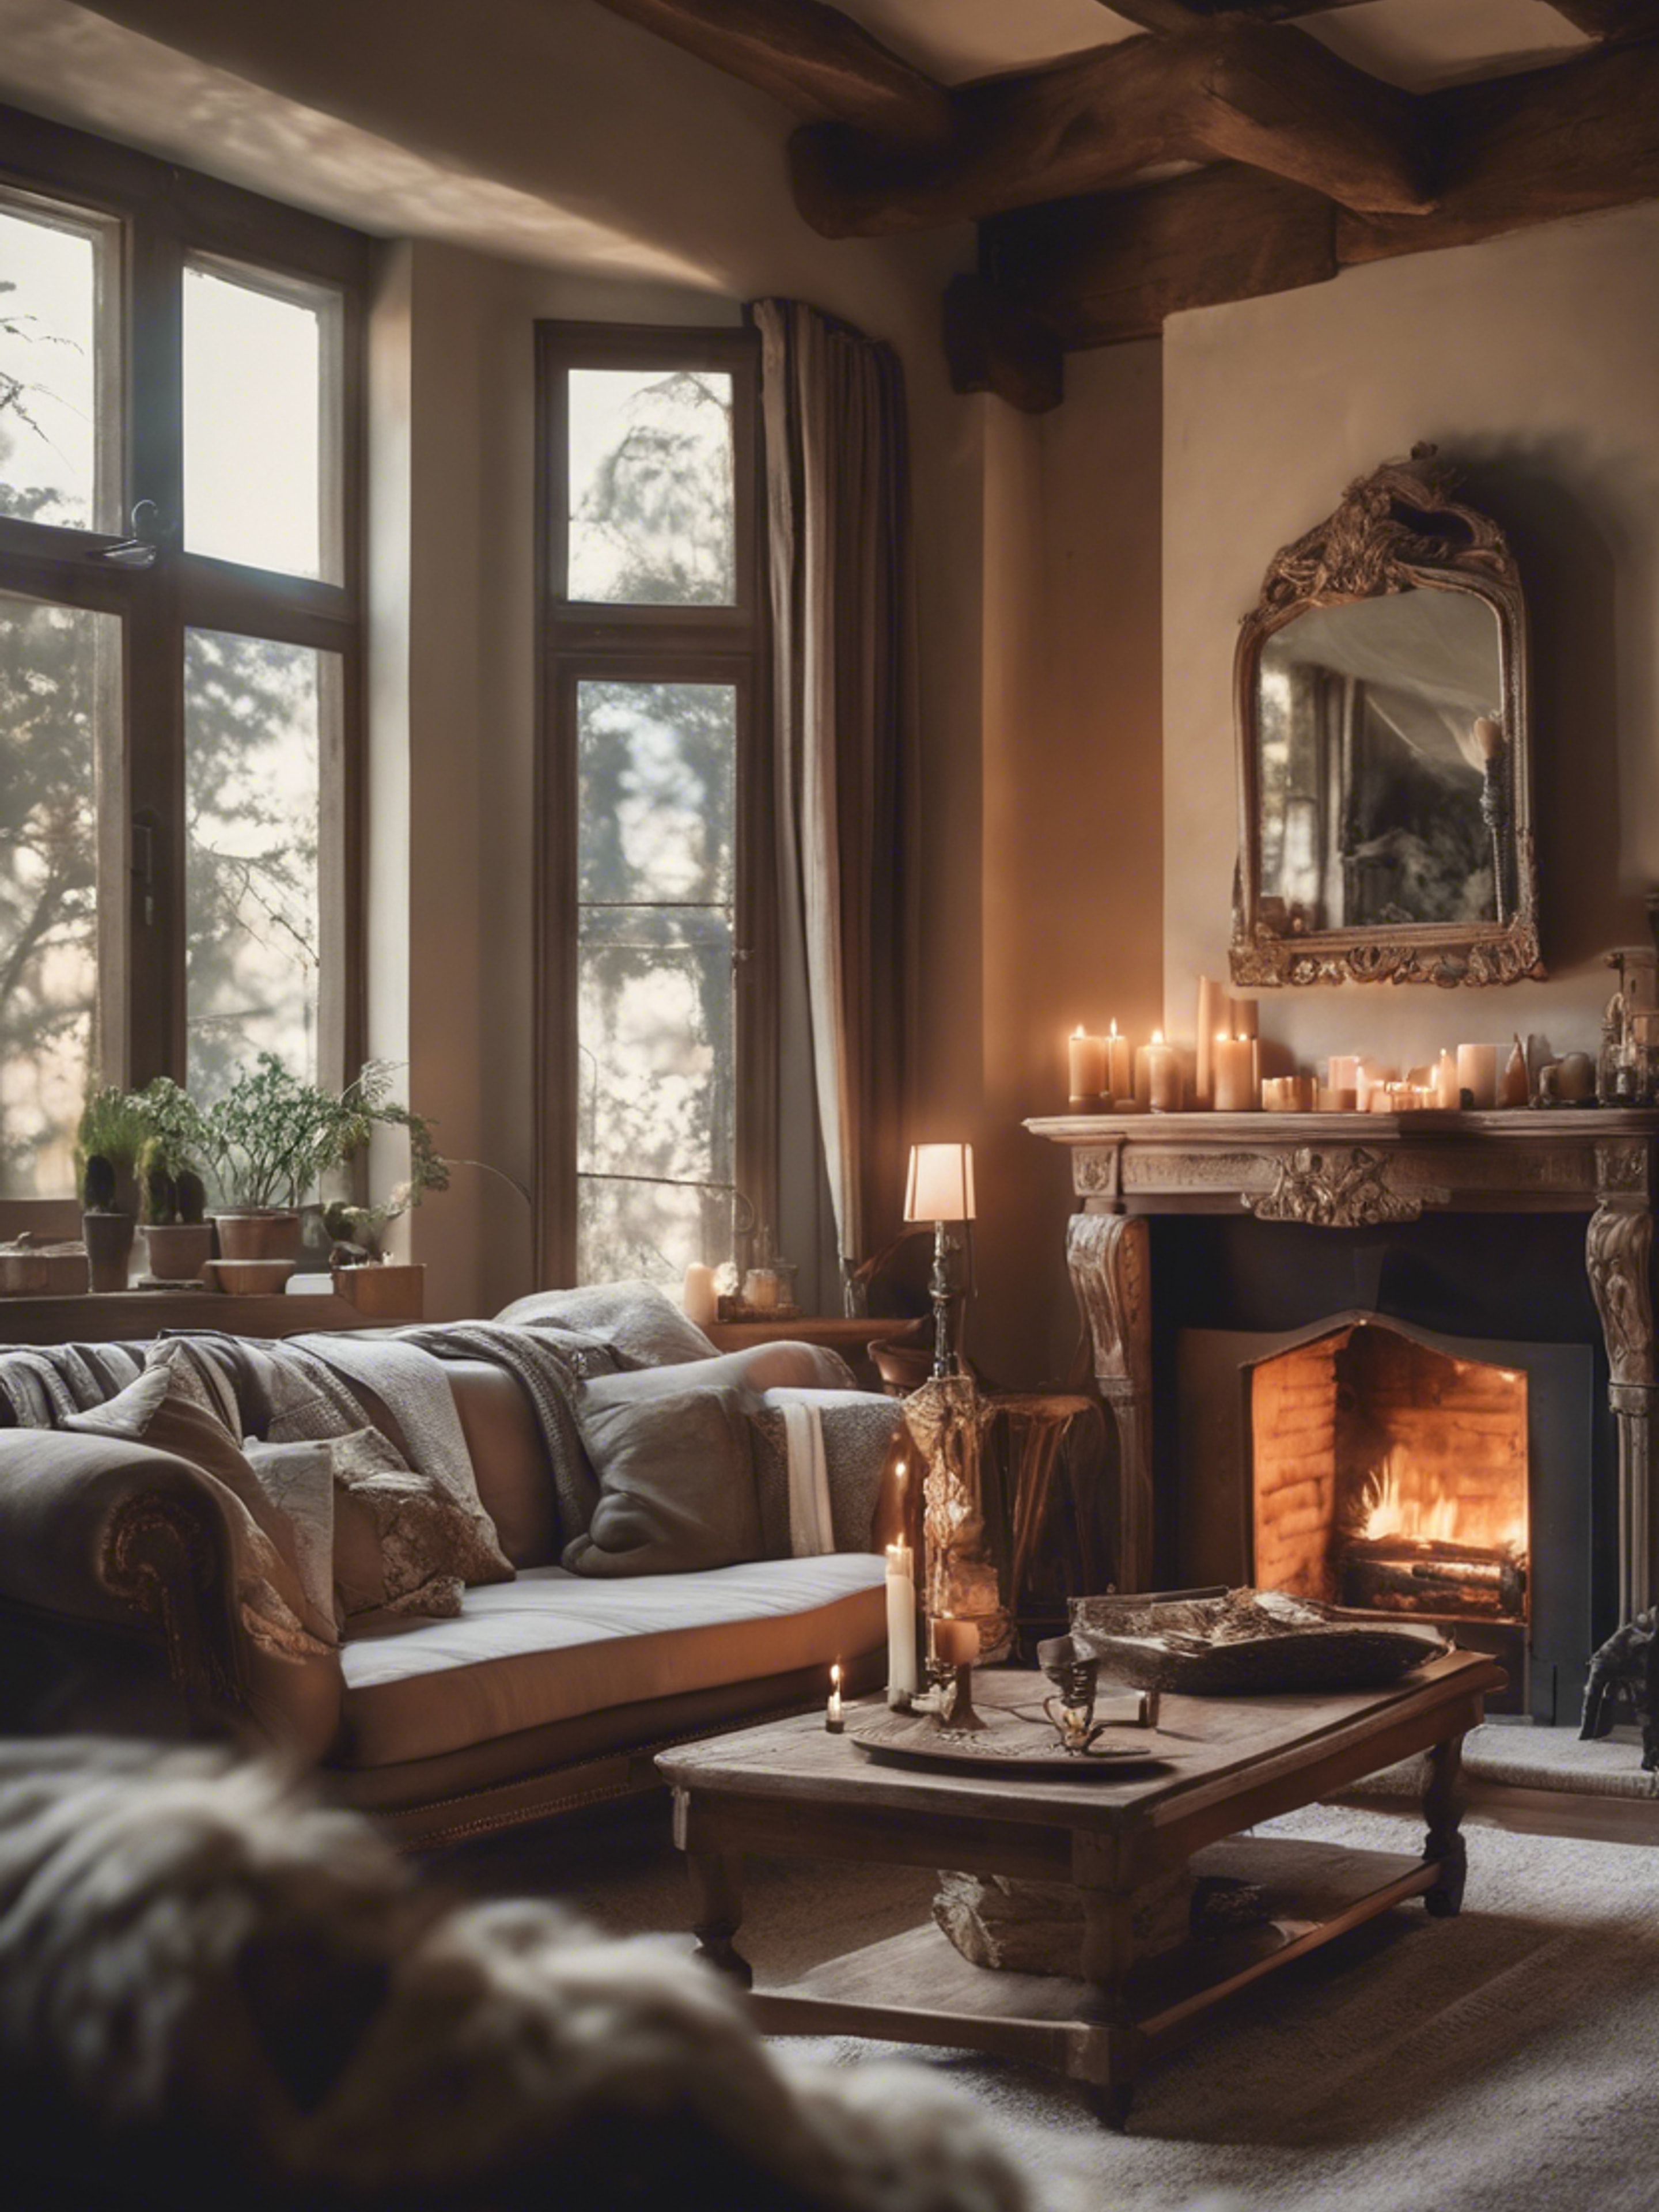 A French country style living room, cozy and comfortable with a roaring fireplace, antique furniture, and soft candlelight. Tapeta[b1f658778f85425ba676]